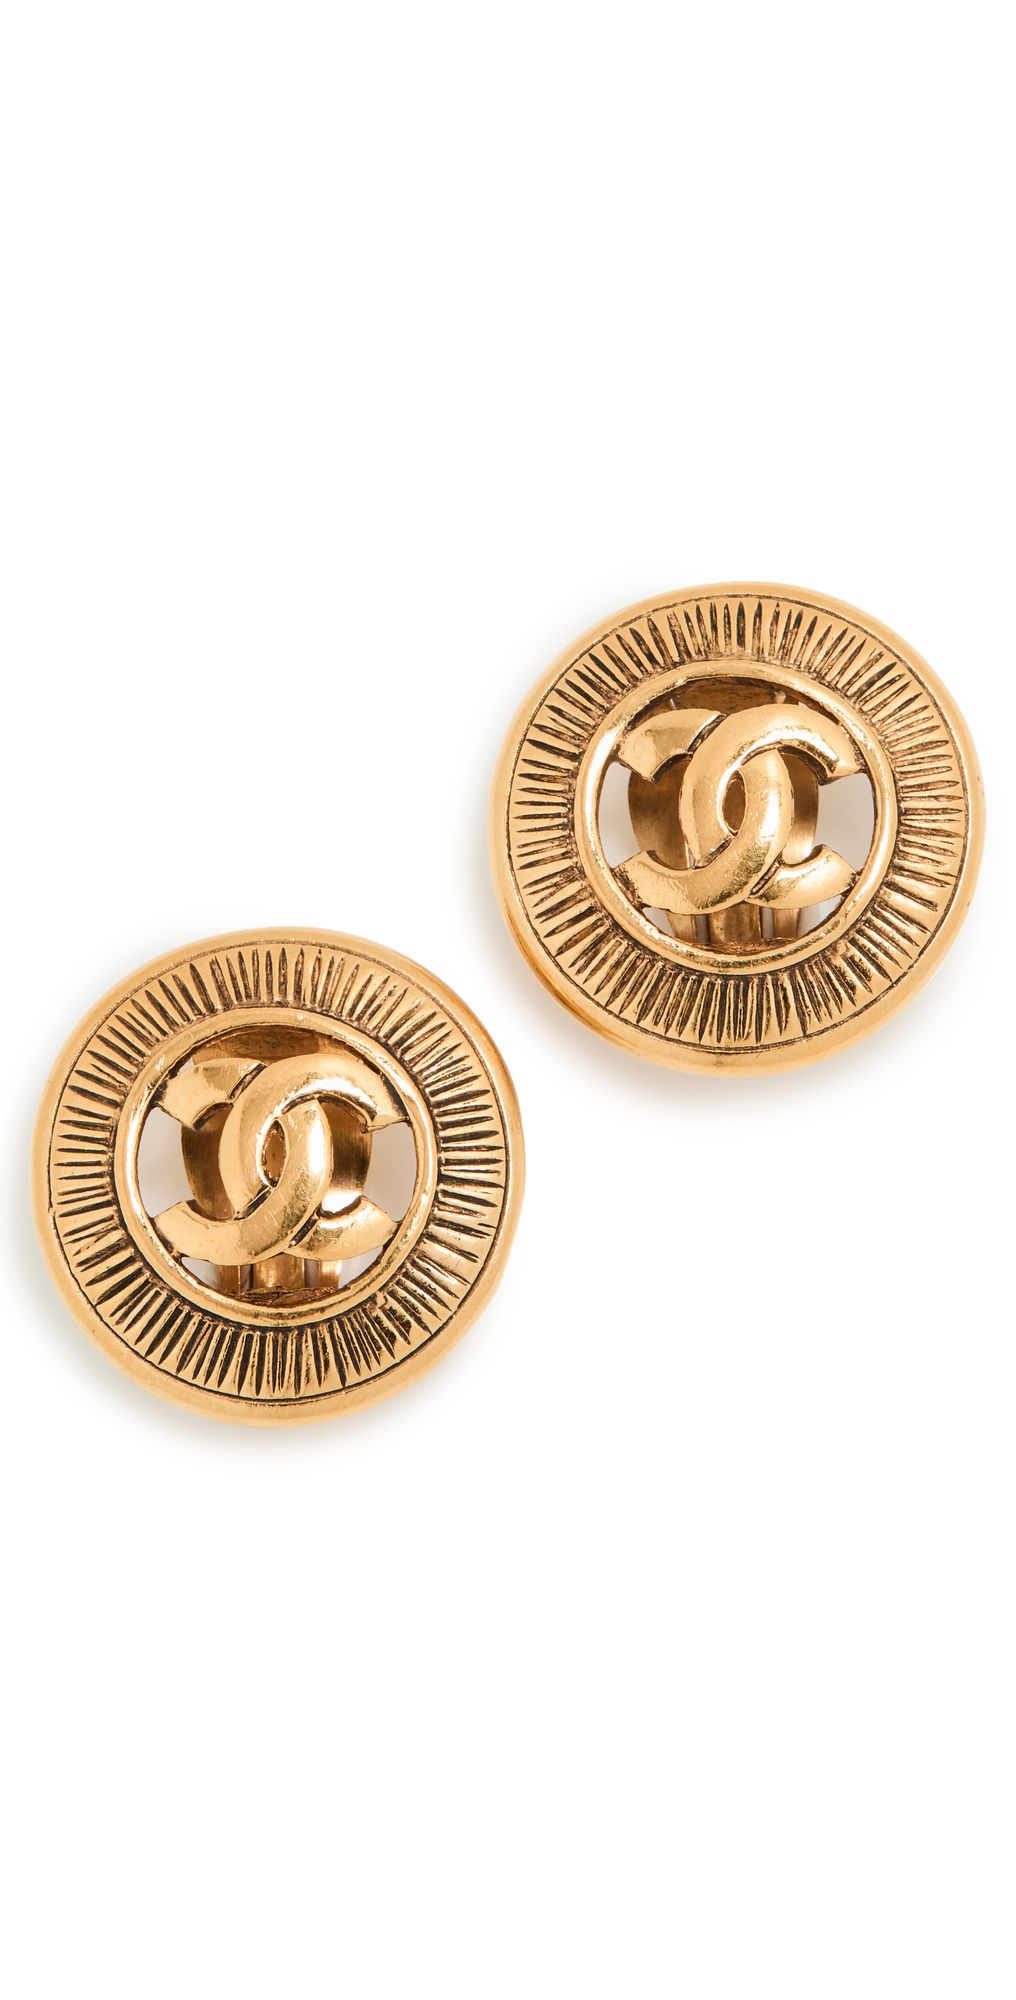 What Goes Around Comes Around Chanel Gold Sunburst Earrings | Shopbop